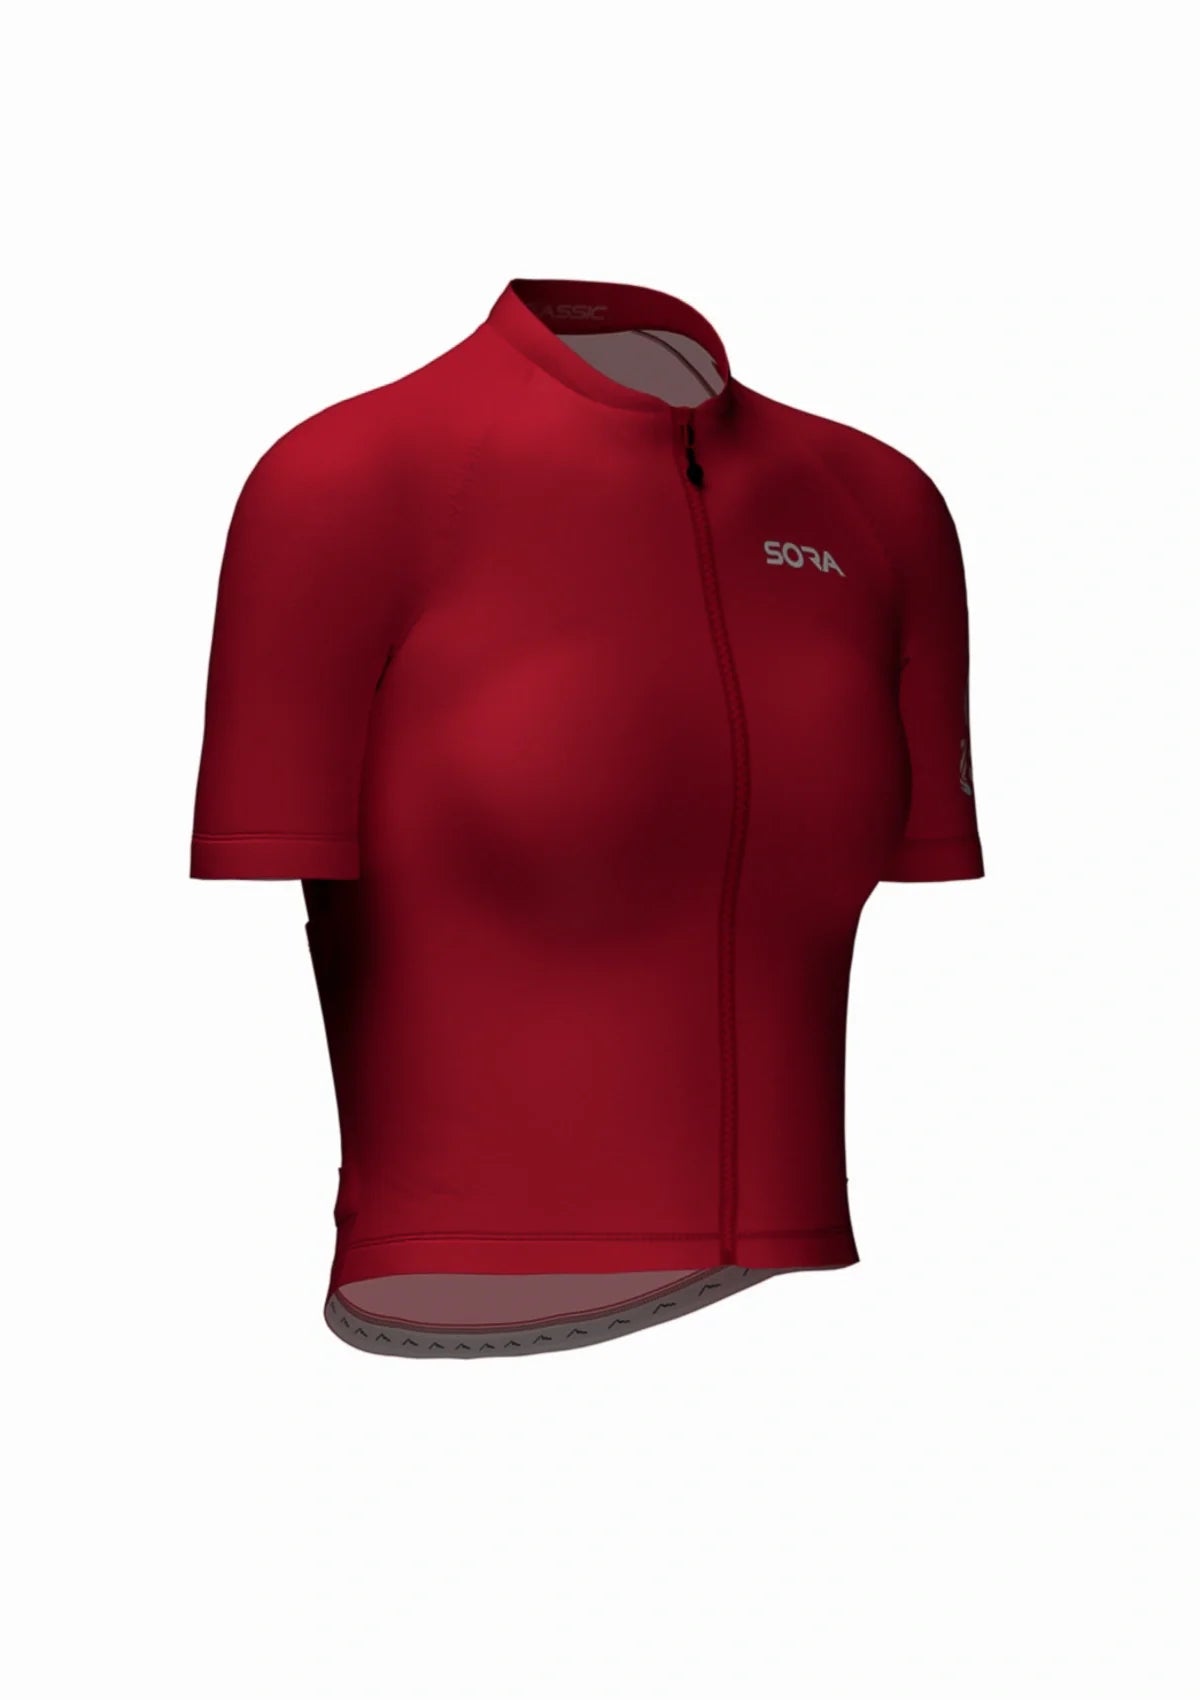 Classic Women's Jersey Red